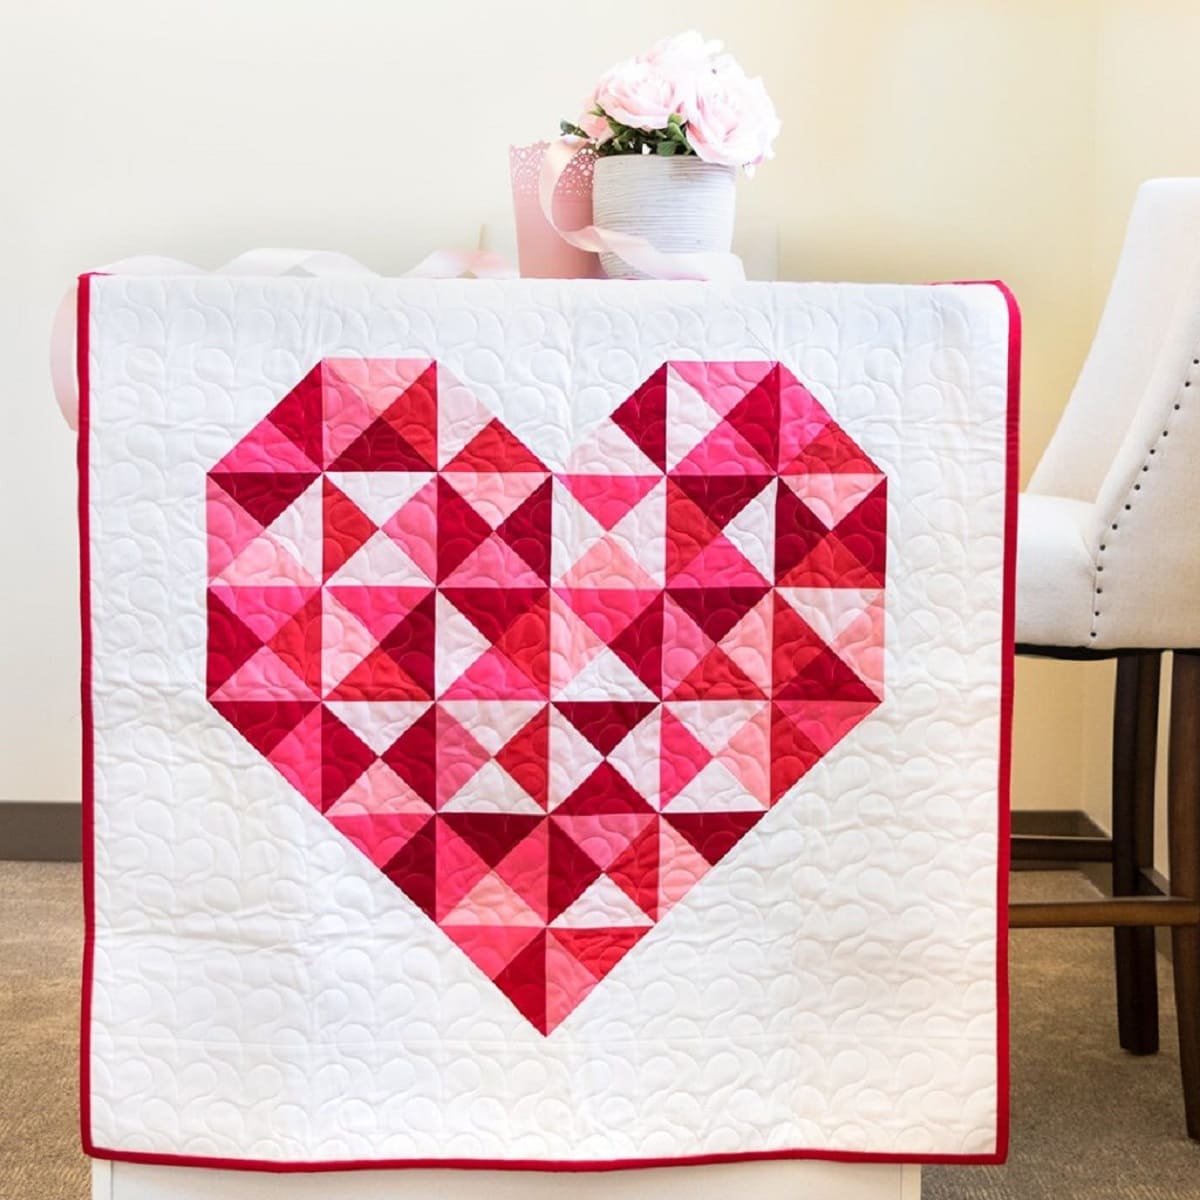 How To Make A Heart Quilt Block